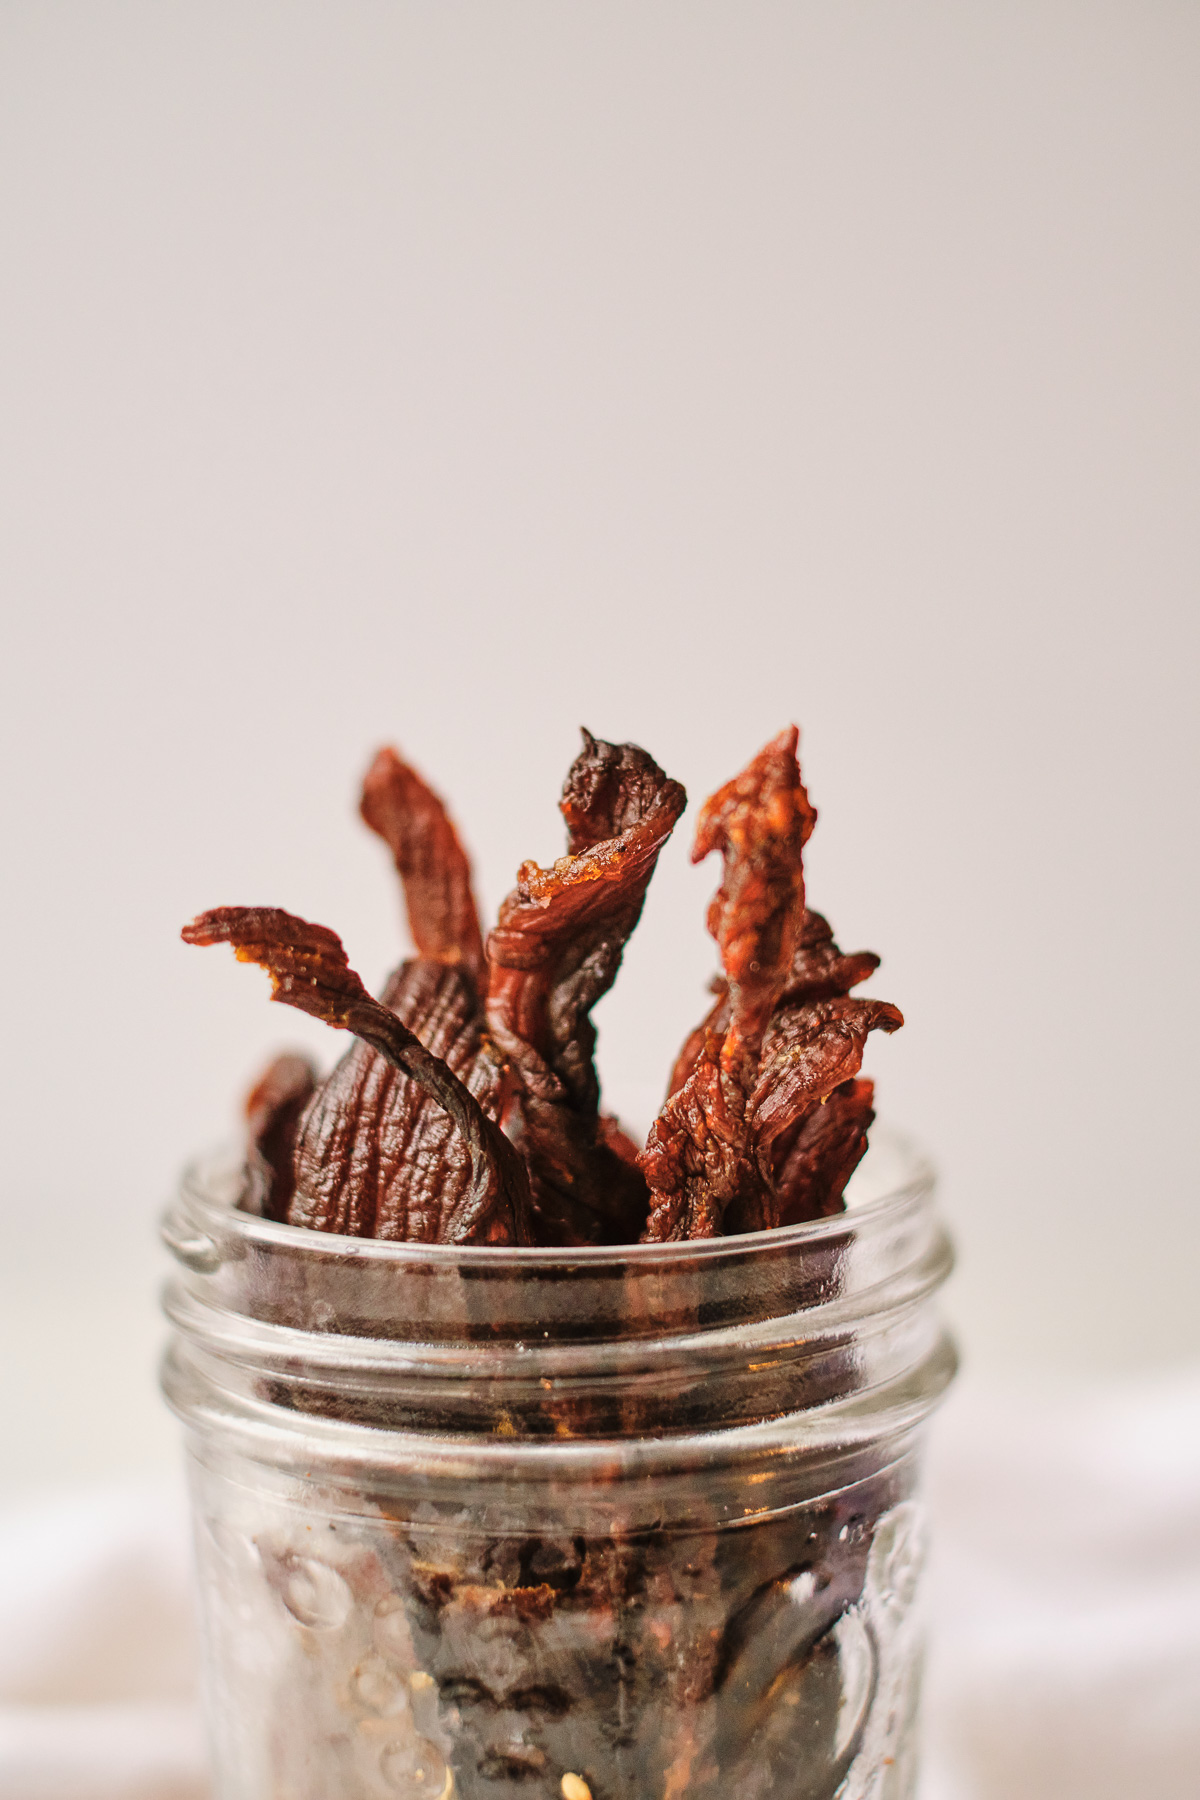 The finished beef jerky in air fryer recipe